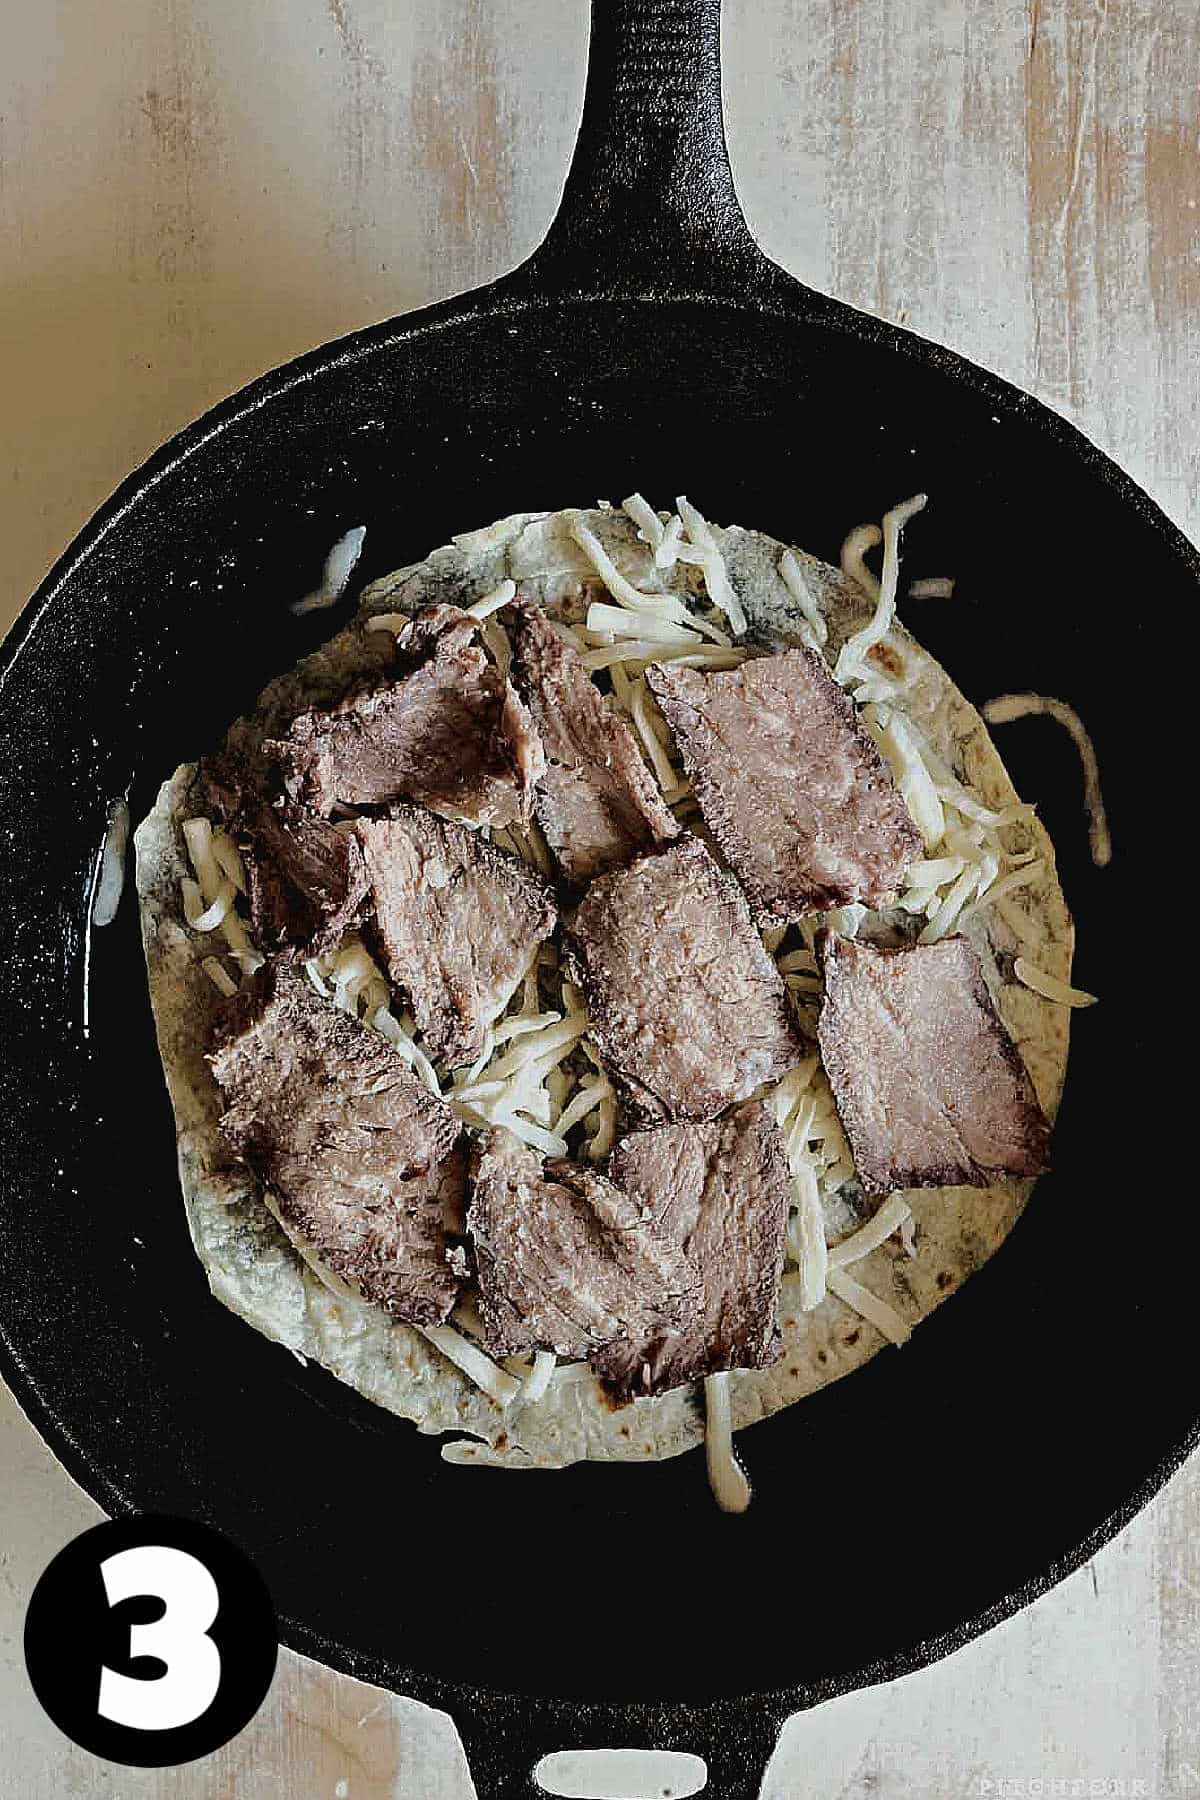 A flour tortilla topped with steak and grated cheese.